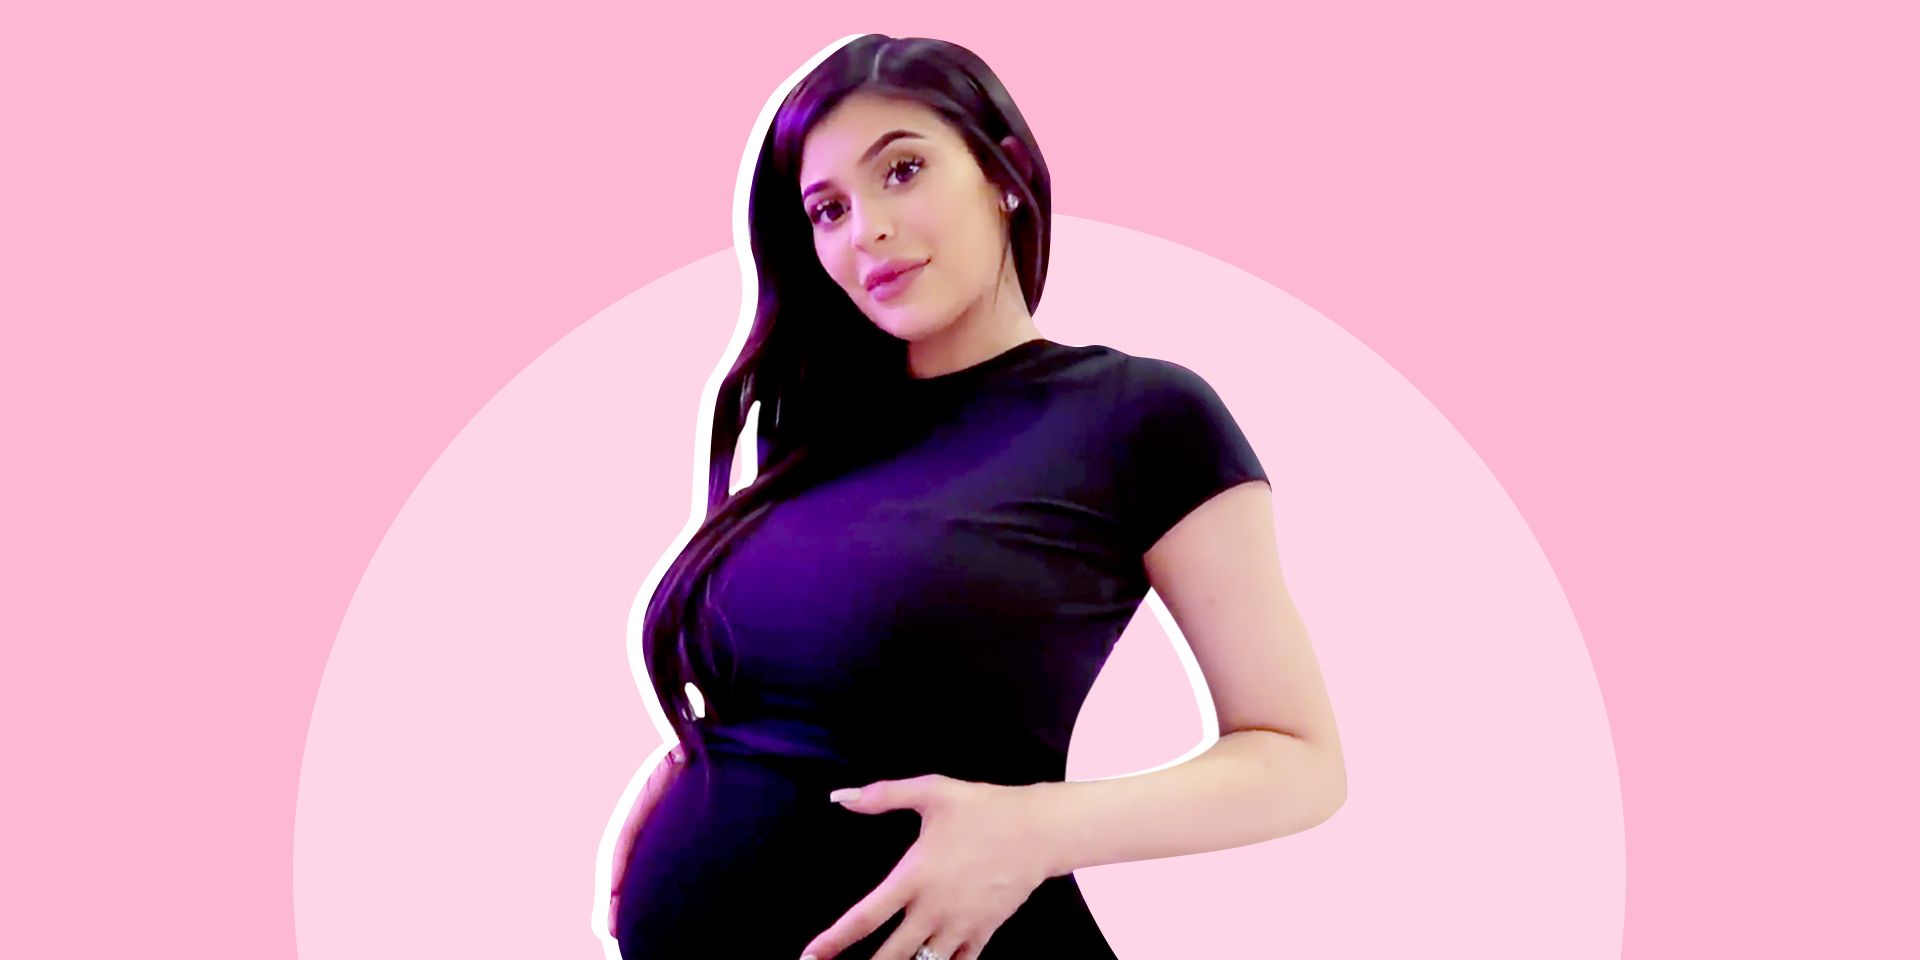 Pregnant Kylie Jenner Flaunts Baby Bump In A Sheer Lace Bodysuit